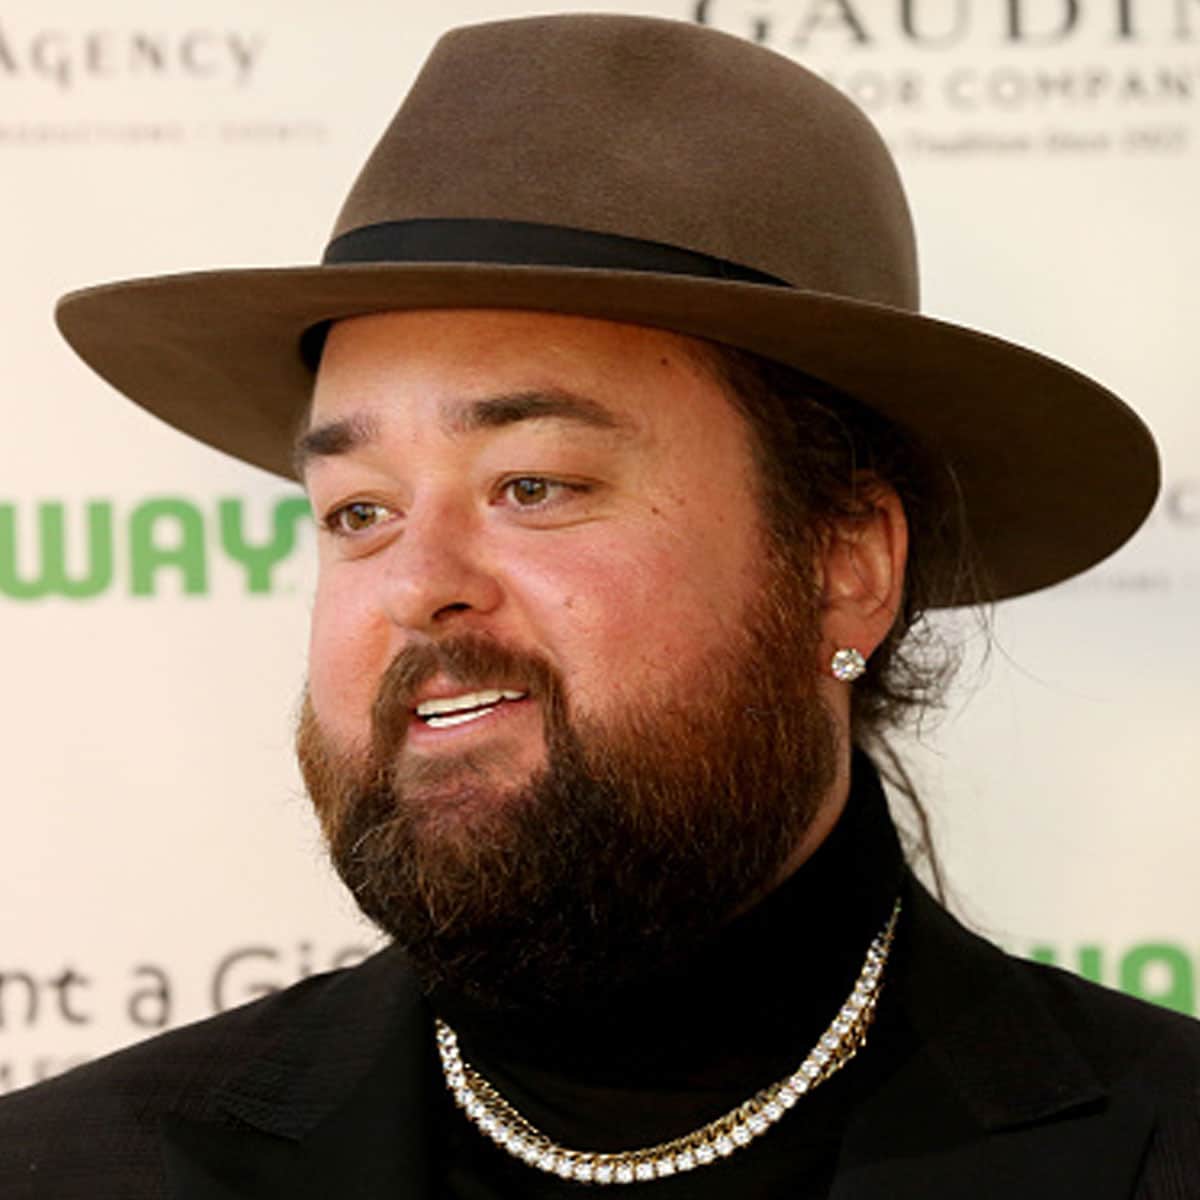 Austin "Chumlee" Russell from History's "Pawn Stars" television series attends the Grant a Gift Autism Foundation's ninth annual Fashion for Autism gala